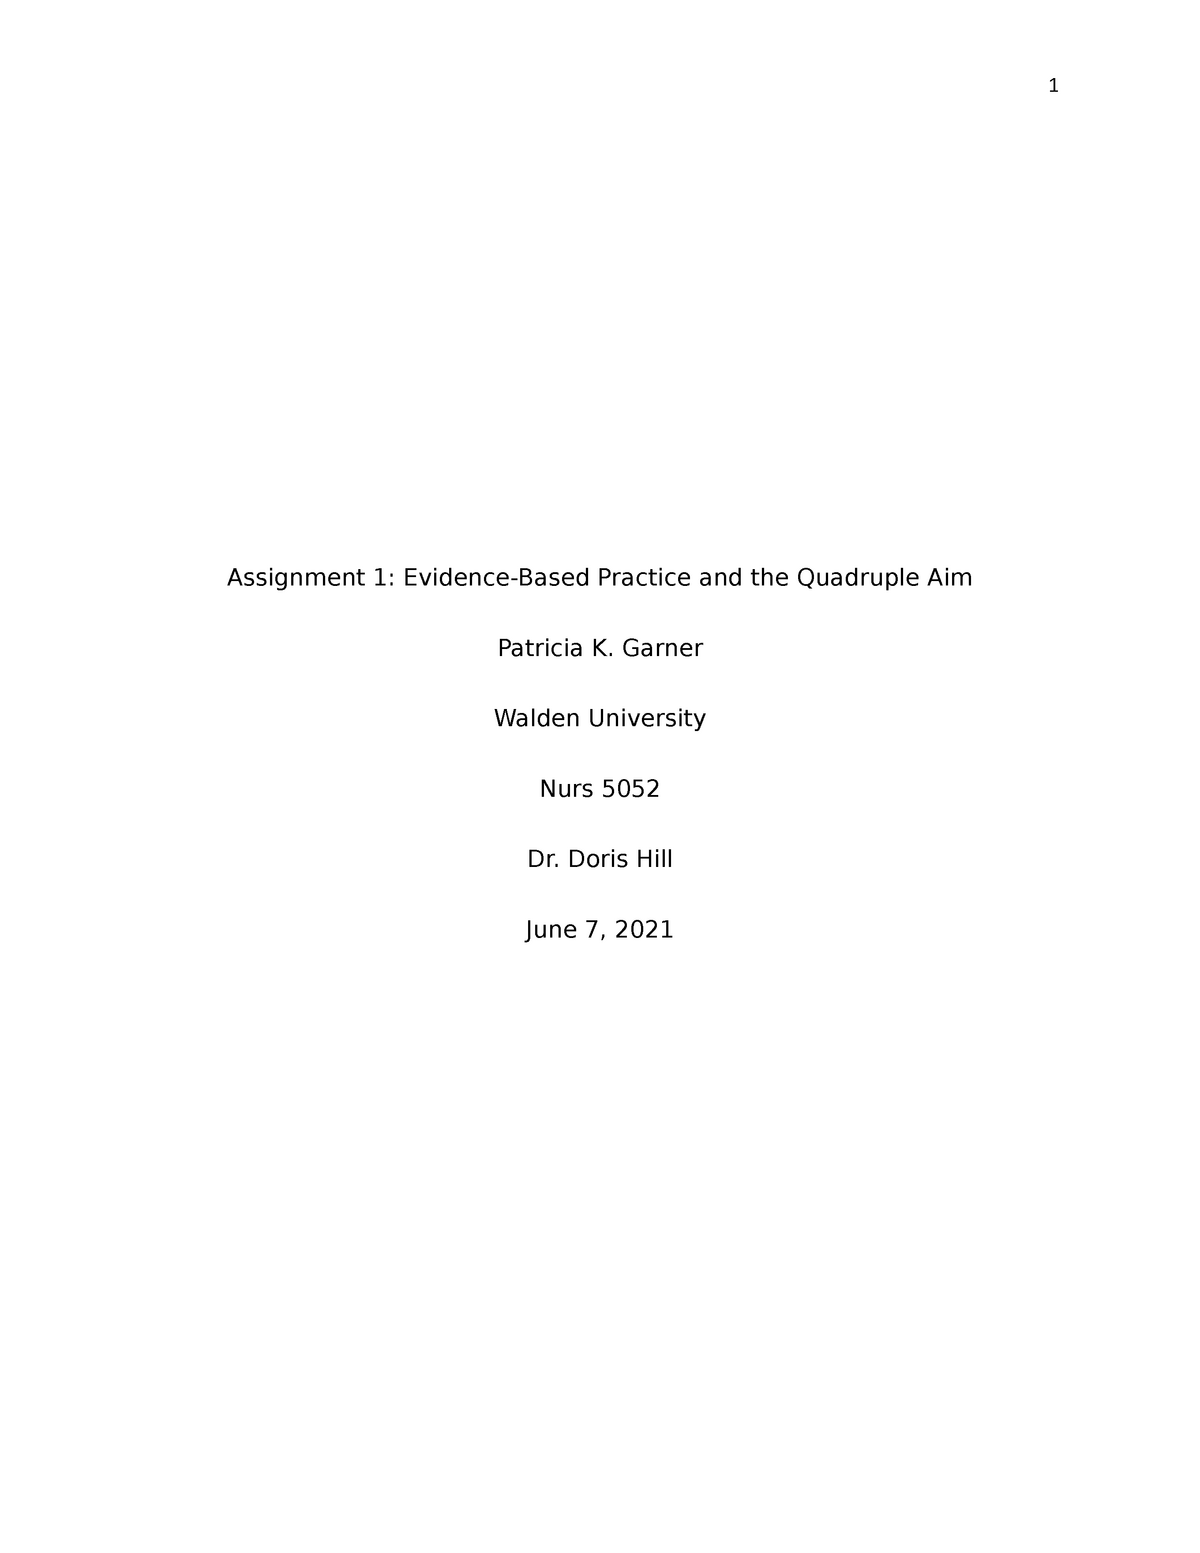 hallmark assignment evidence based paper